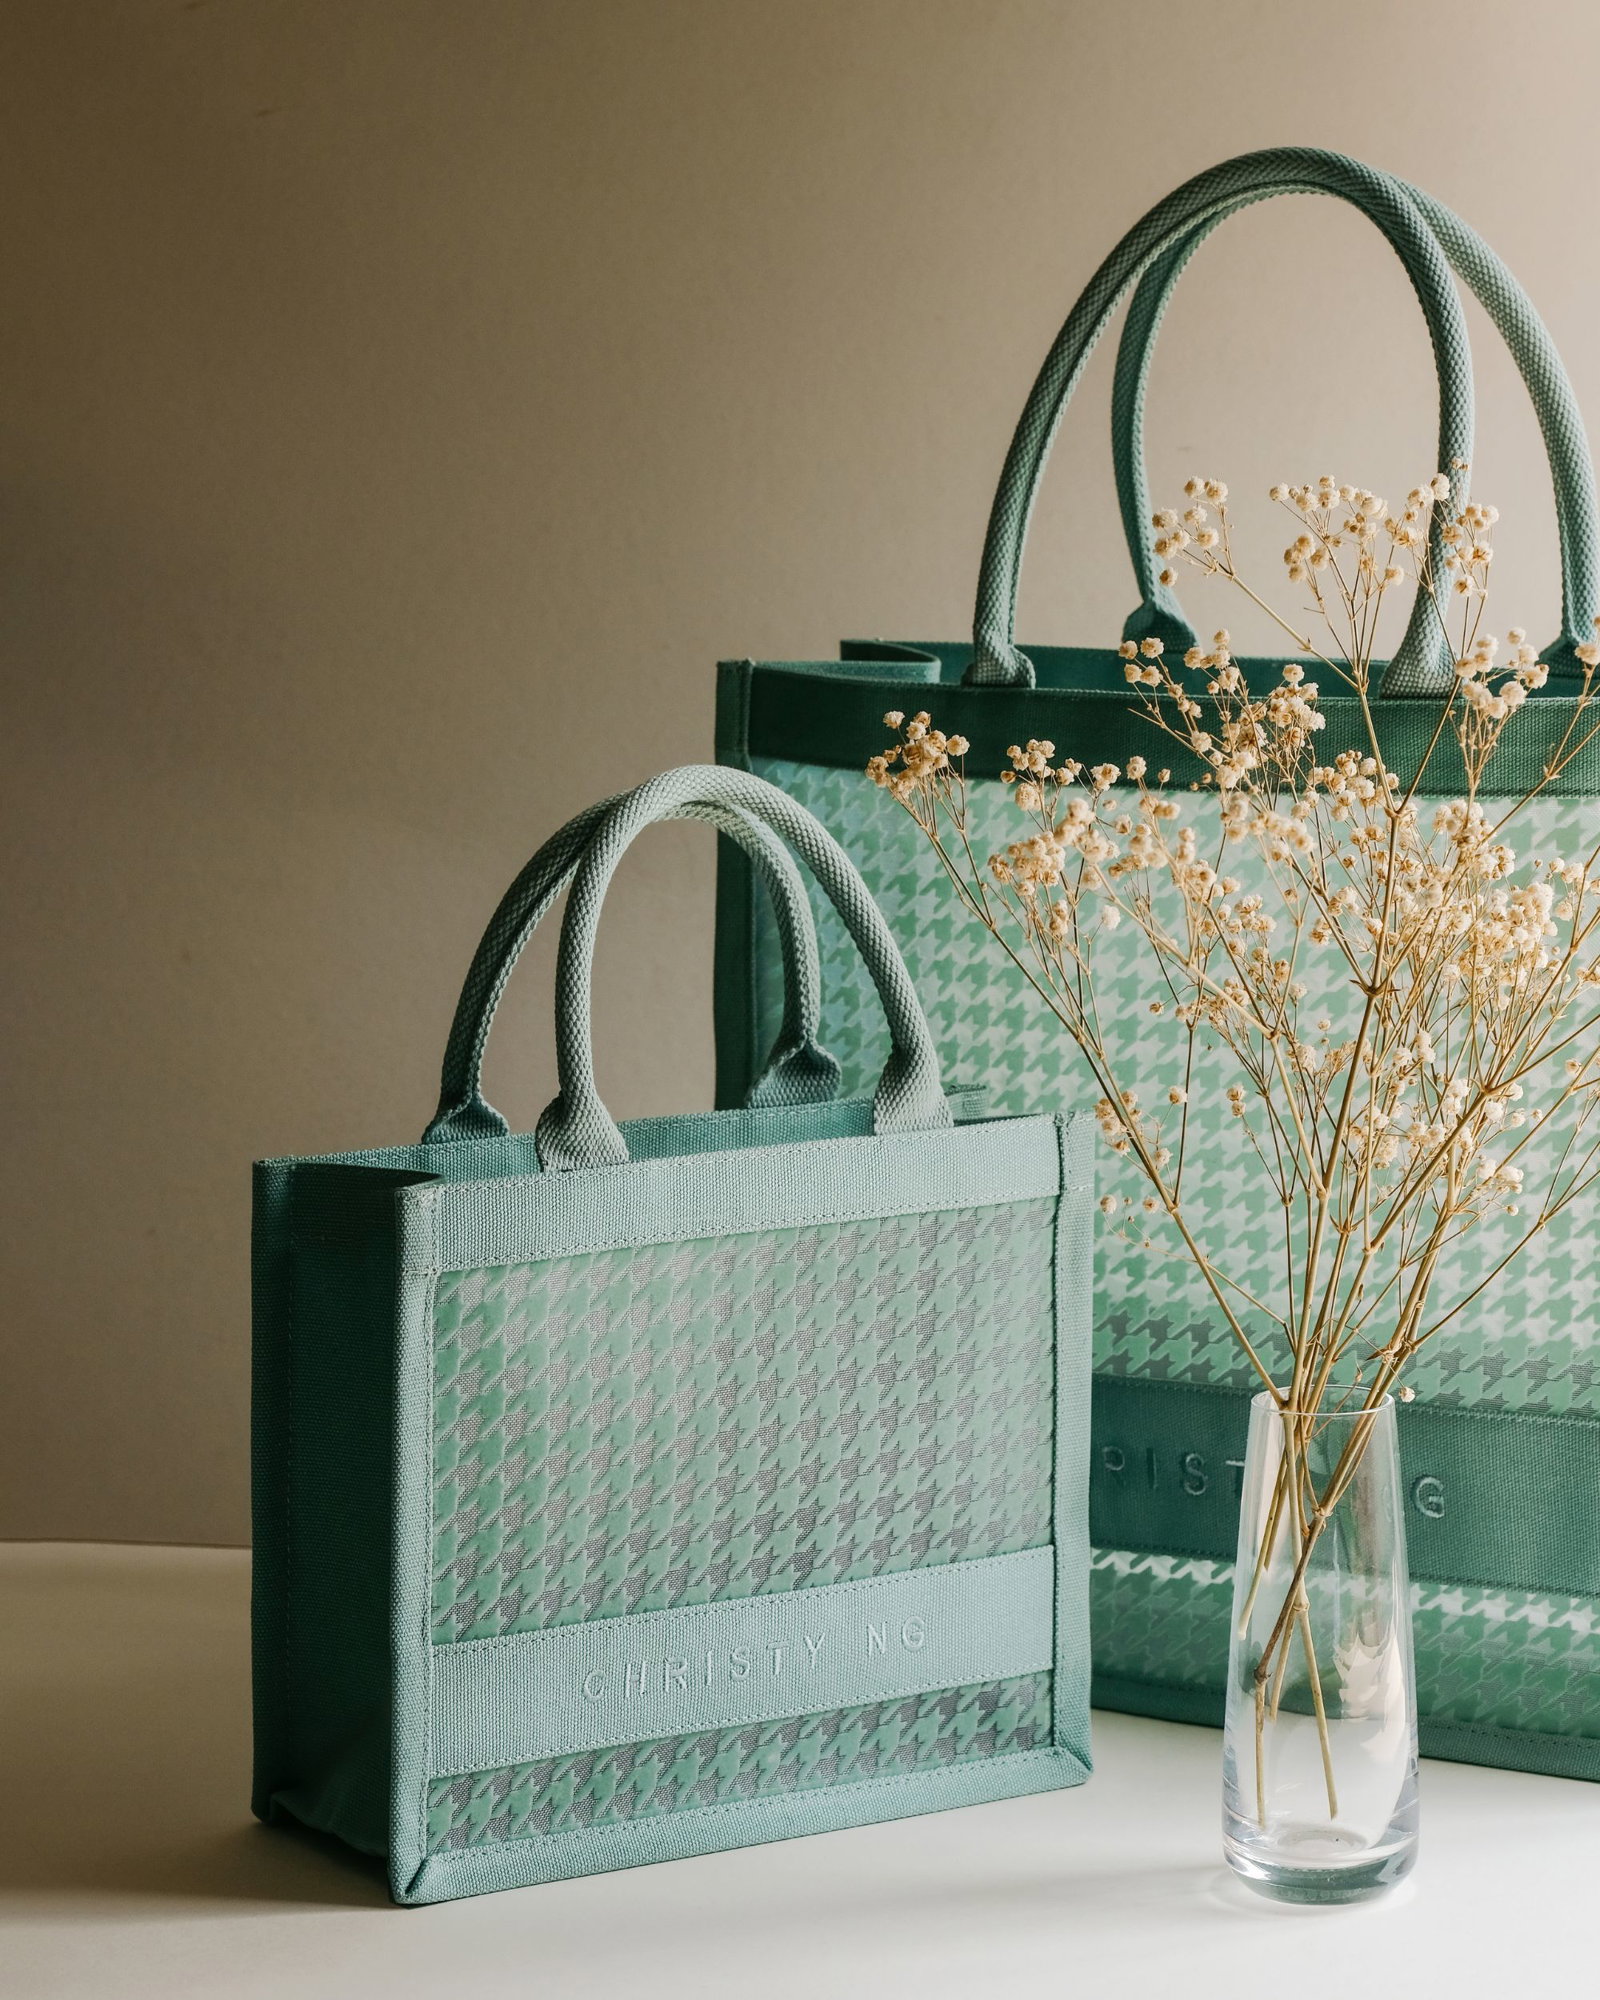 You asked and we listened. The Brie tote bag is now restocked in four  amazing hues online at www.ChristyNg.com & in all stores today…